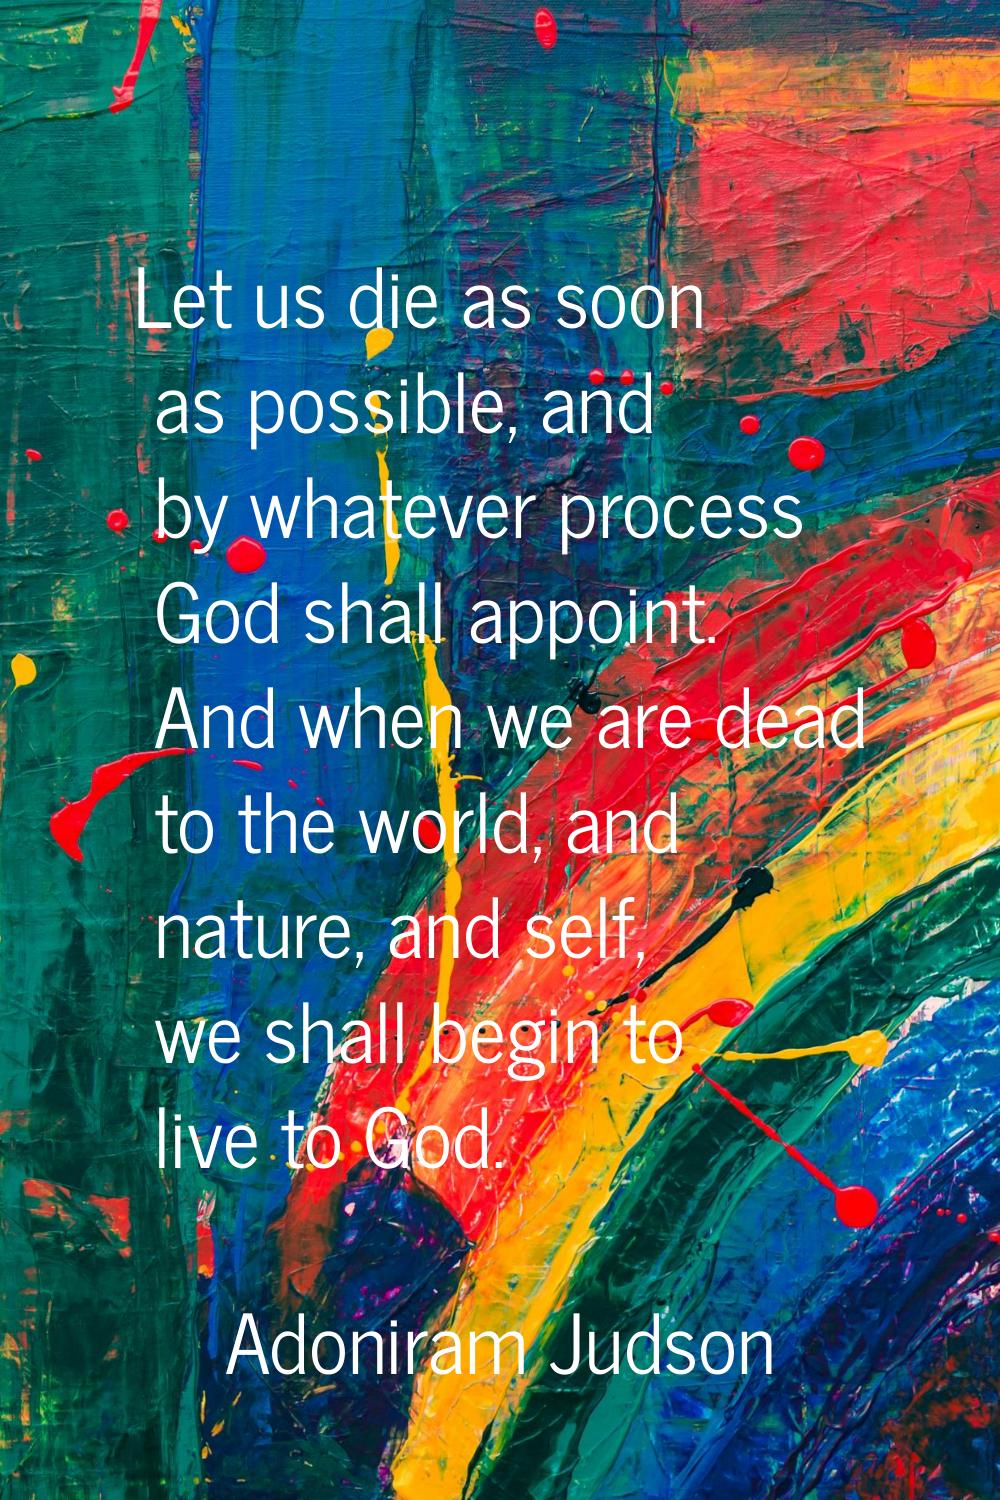 Let us die as soon as possible, and by whatever process God shall appoint. And when we are dead to 